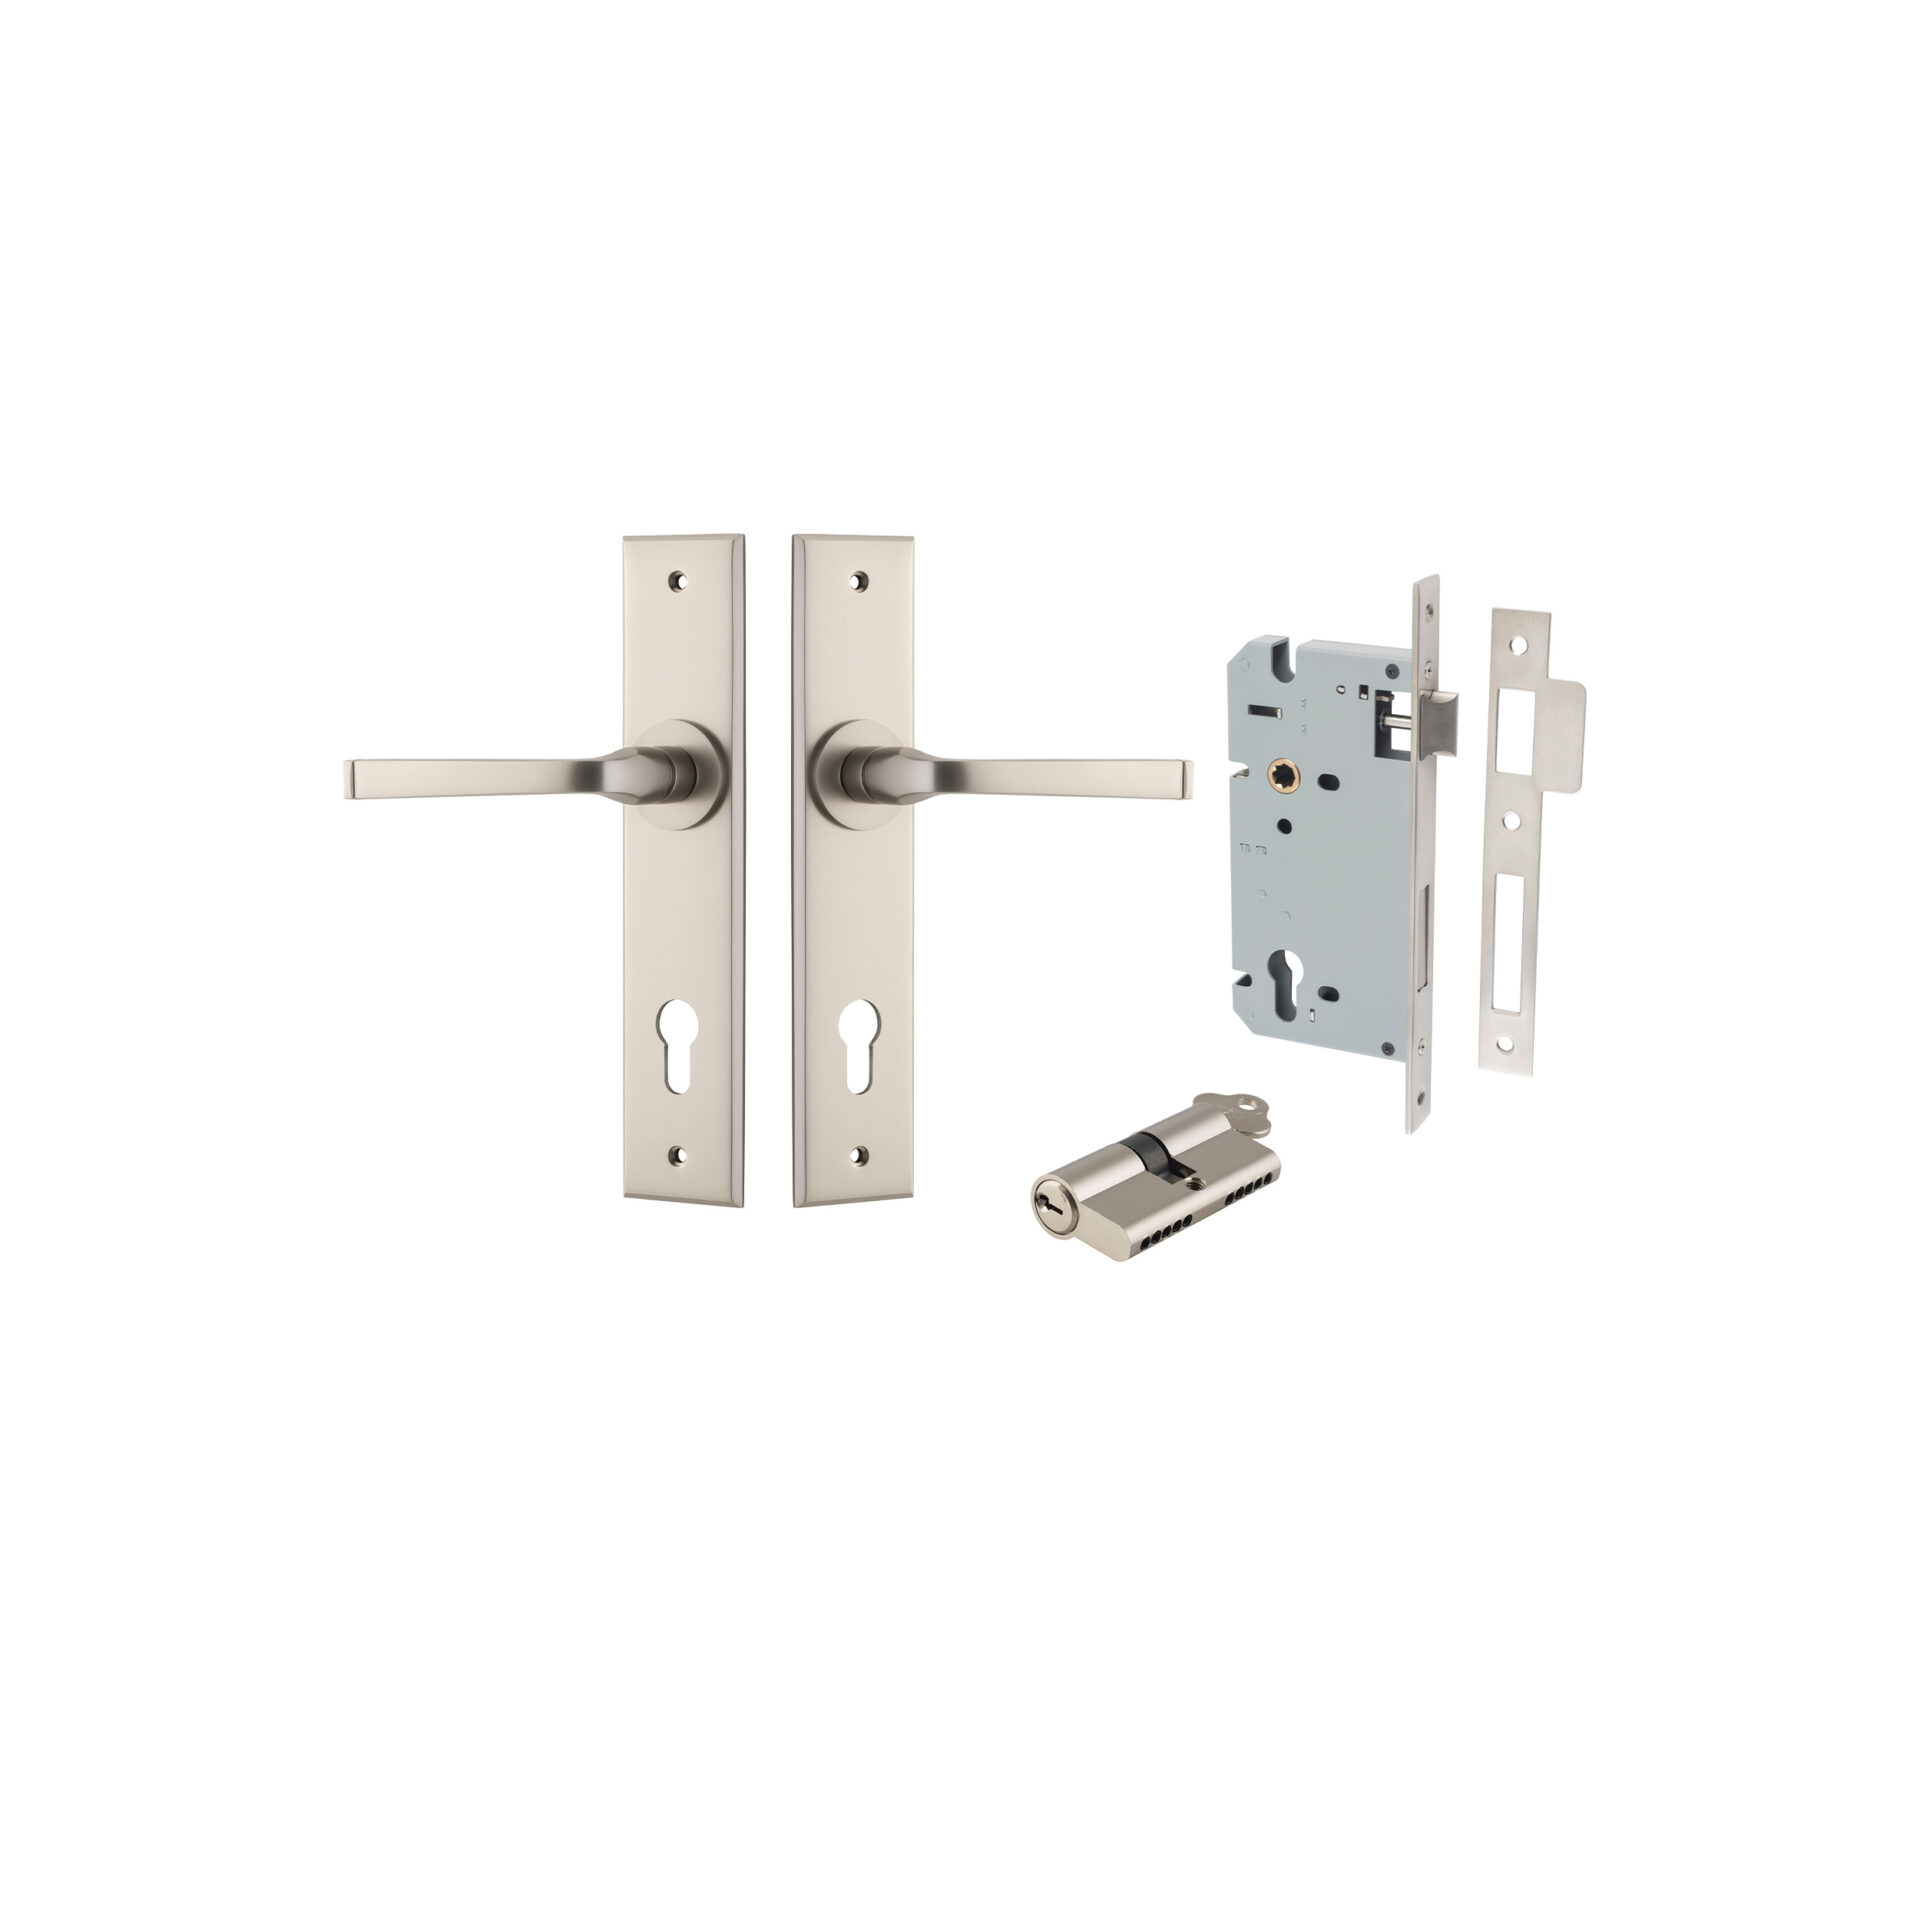 14788KENTR60KK - Annecy Lever - Chamfered Backplate Entrance Kit with High Security Lock - Satin Nickel - Entrance